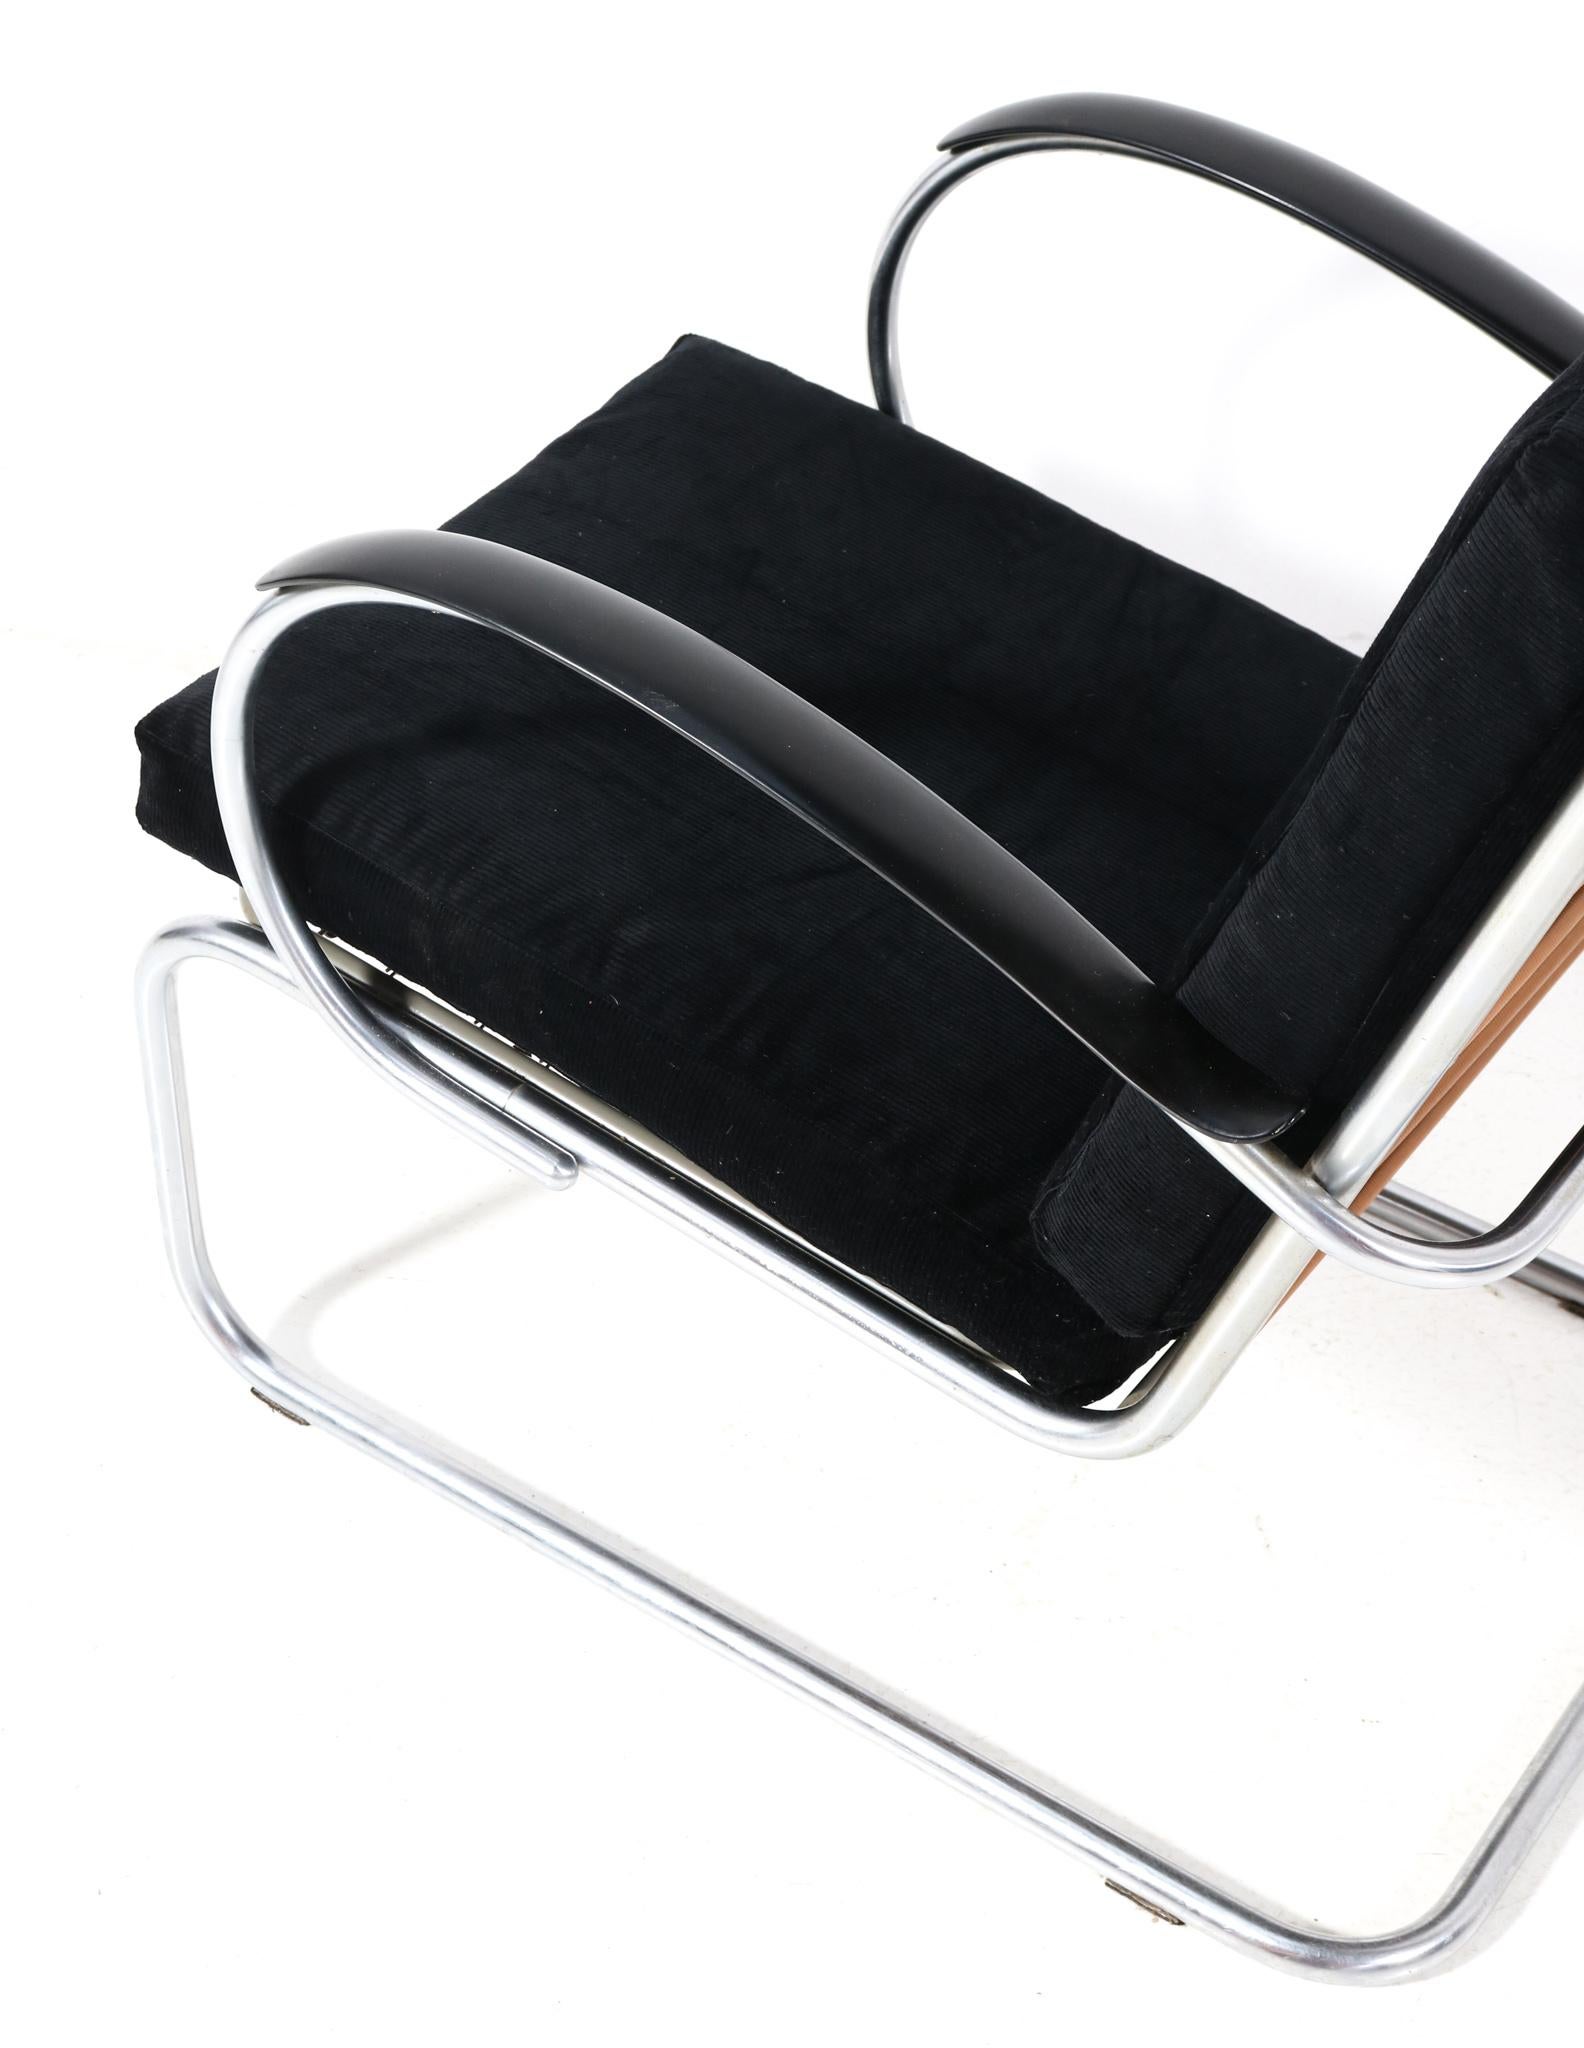 Metal Two Art Deco Bauhaus Model 409 Lounge Chairs by W.H. Gispen for Gispen, 1930s For Sale